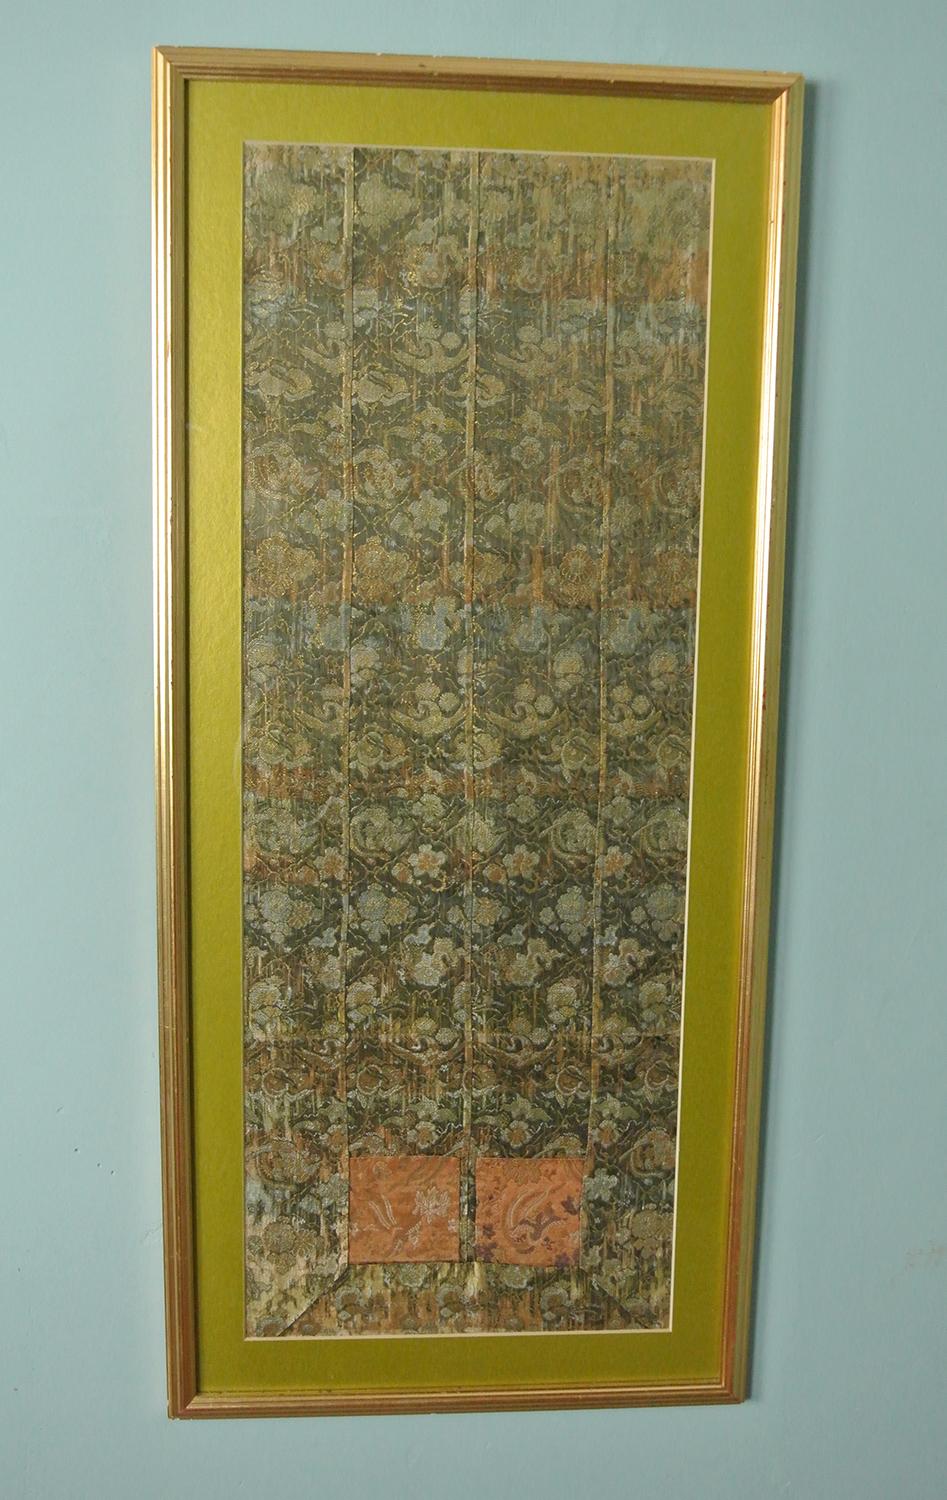 Fine 18th Century Framed Chinese Silk Sleeve Embroidered with Cranes, Clouds and In Good Condition For Sale In Heathfield, GB